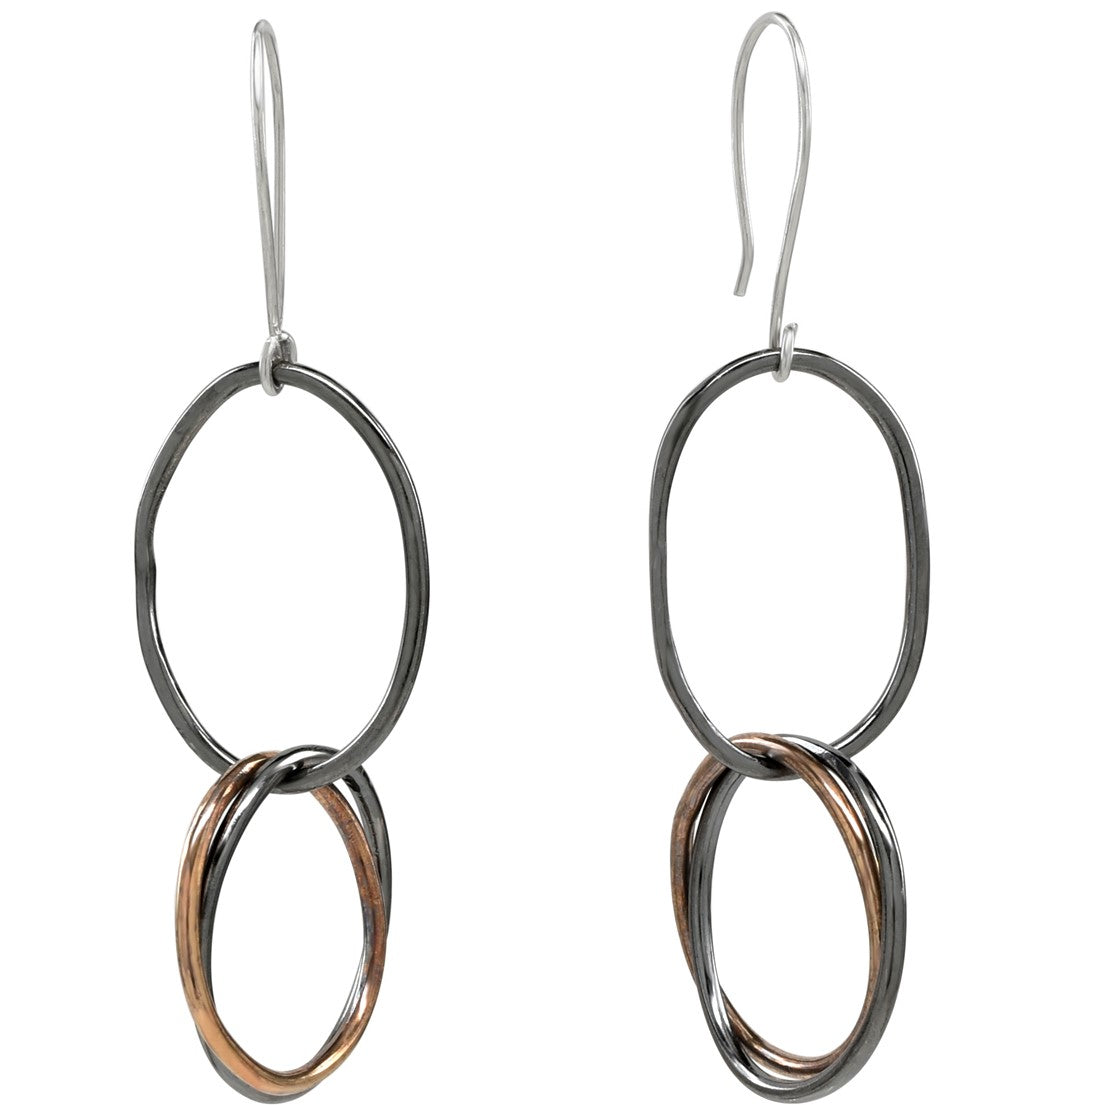 Silvia - Oxidized Sterling Silver & 14K Yellow Gold Mobius Rings Dangle Earrings